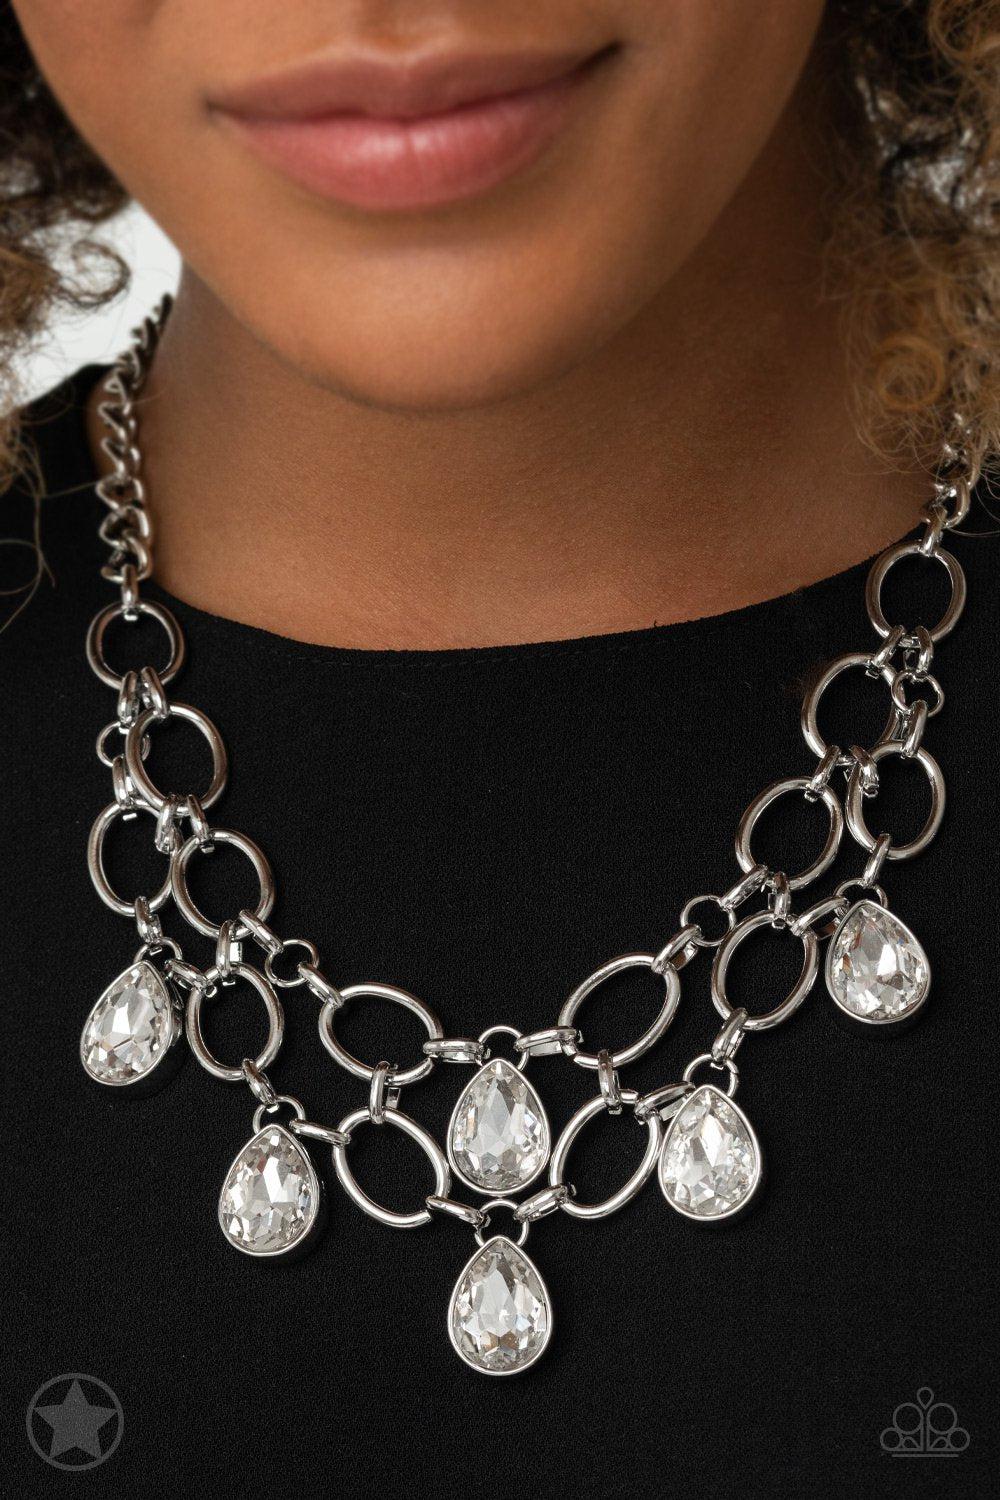 Show-Stopping Shimmer White Rhinestone Necklace - Paparazzi Accessories - lightbox -CarasShop.com - $5 Jewelry by Cara Jewels